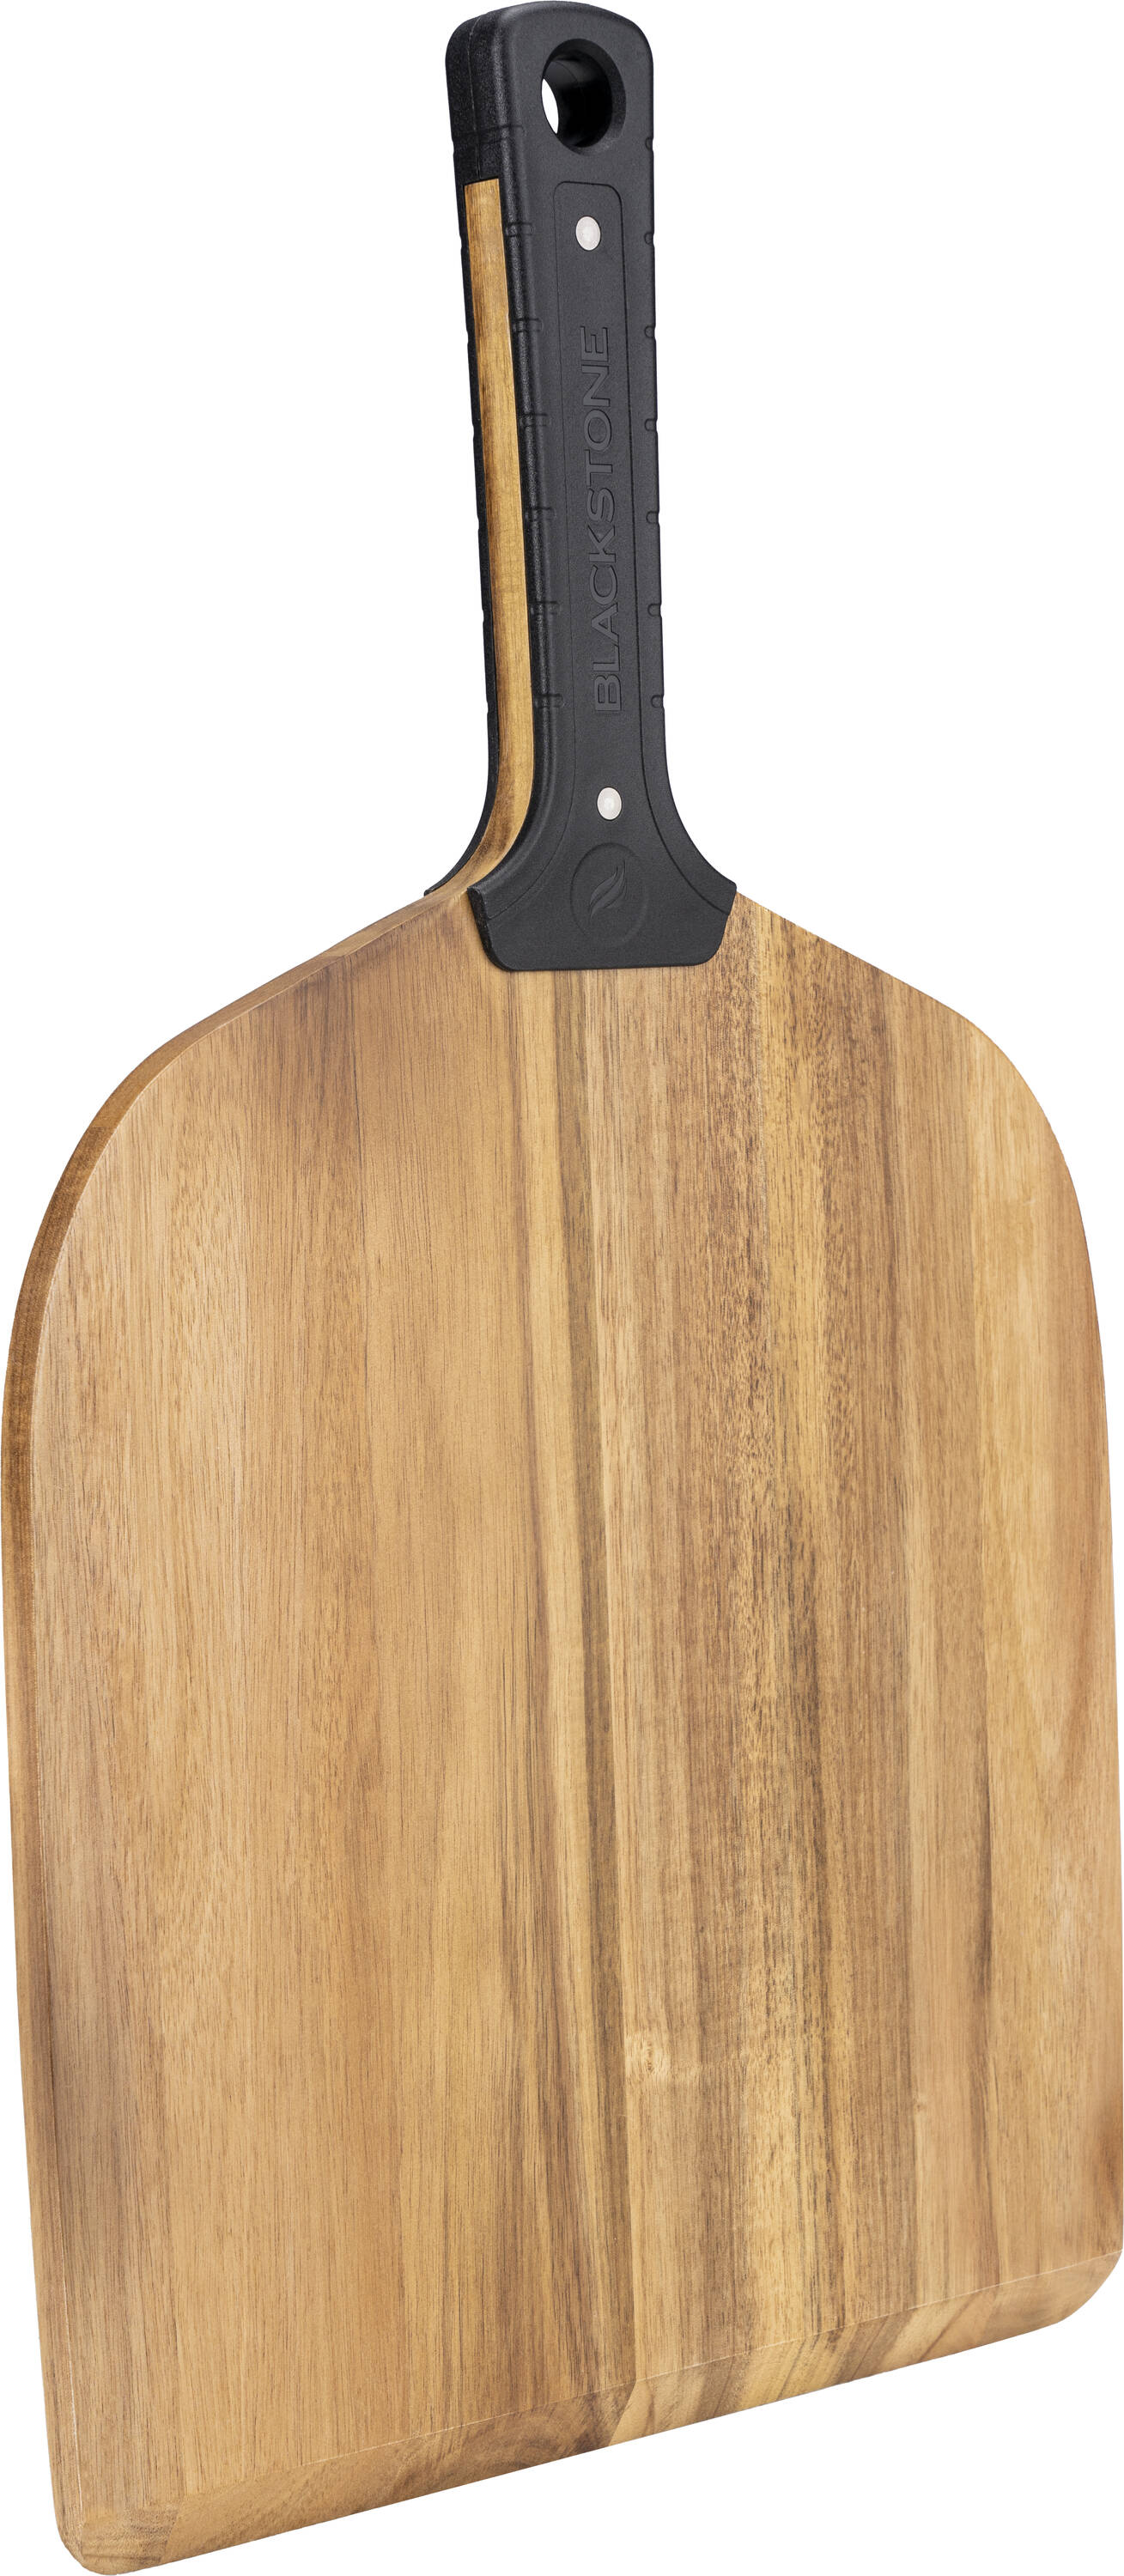 16 Inch Bamboo Paddle with Holes, Solid Durable Wood Paddle with Smooth  Surface, 1 Pack